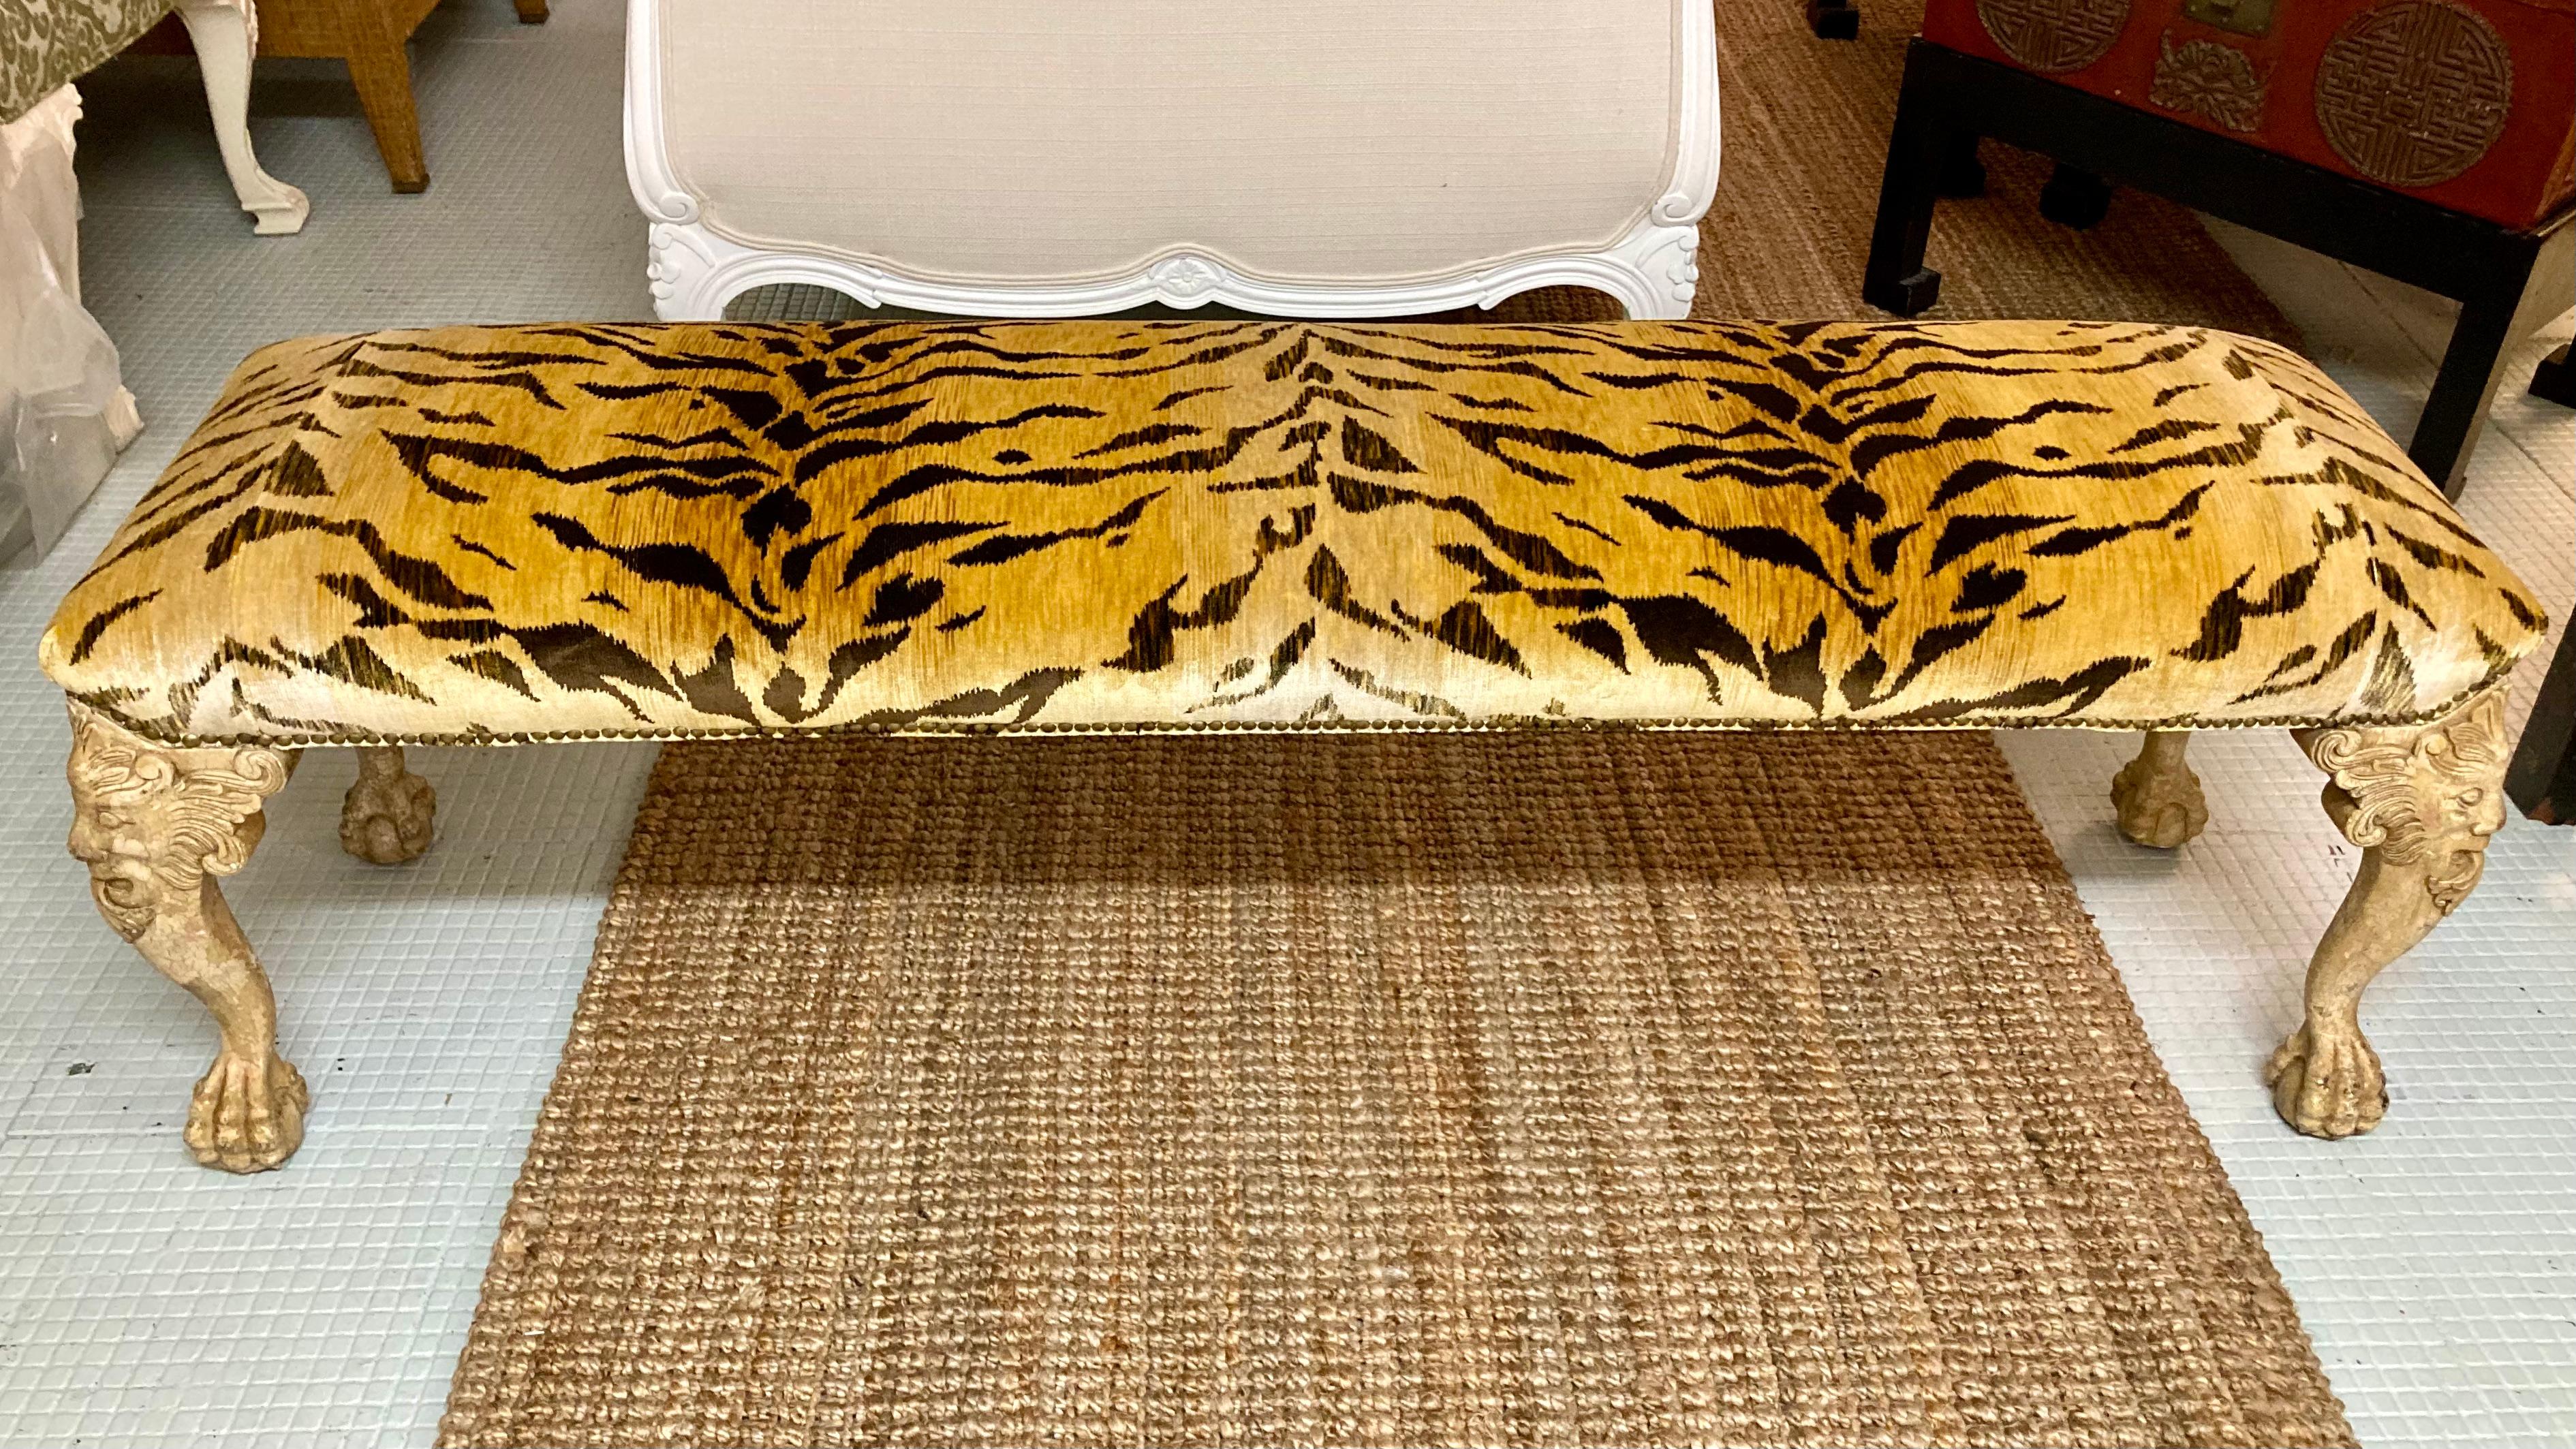 Beautiful Italian carved bench freshly upholstered in tiger silk velvet. Very nice nail head details around the perimeter. Each leg has a hand carved grotto head and the original finish. Add some eclectic Venetian style to your home. Perfect at the